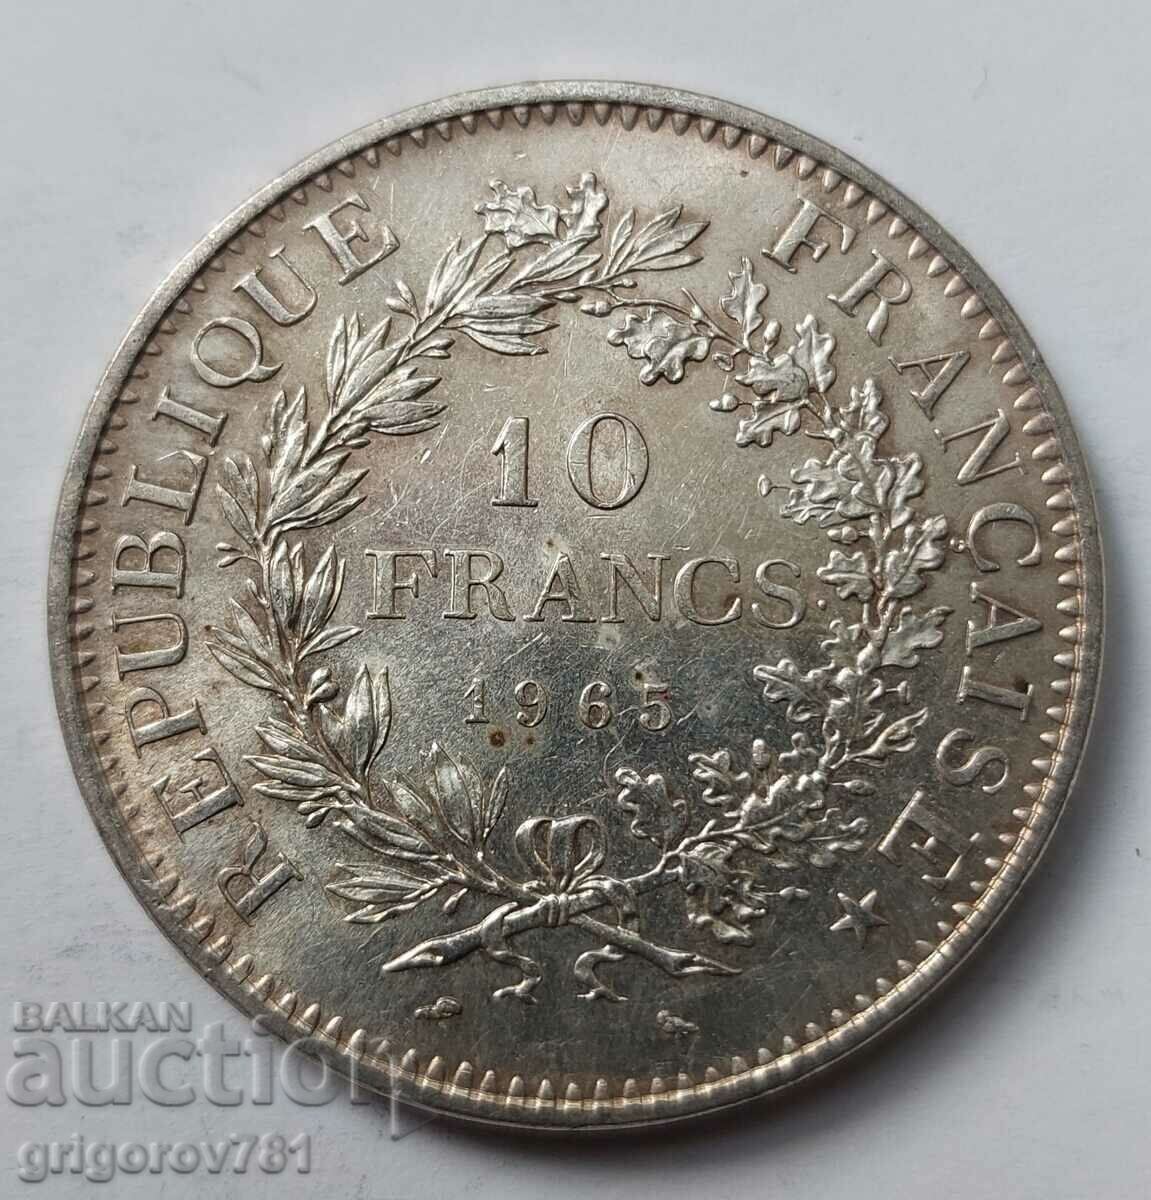 10 Francs Silver France 1965 - Silver Coin #49